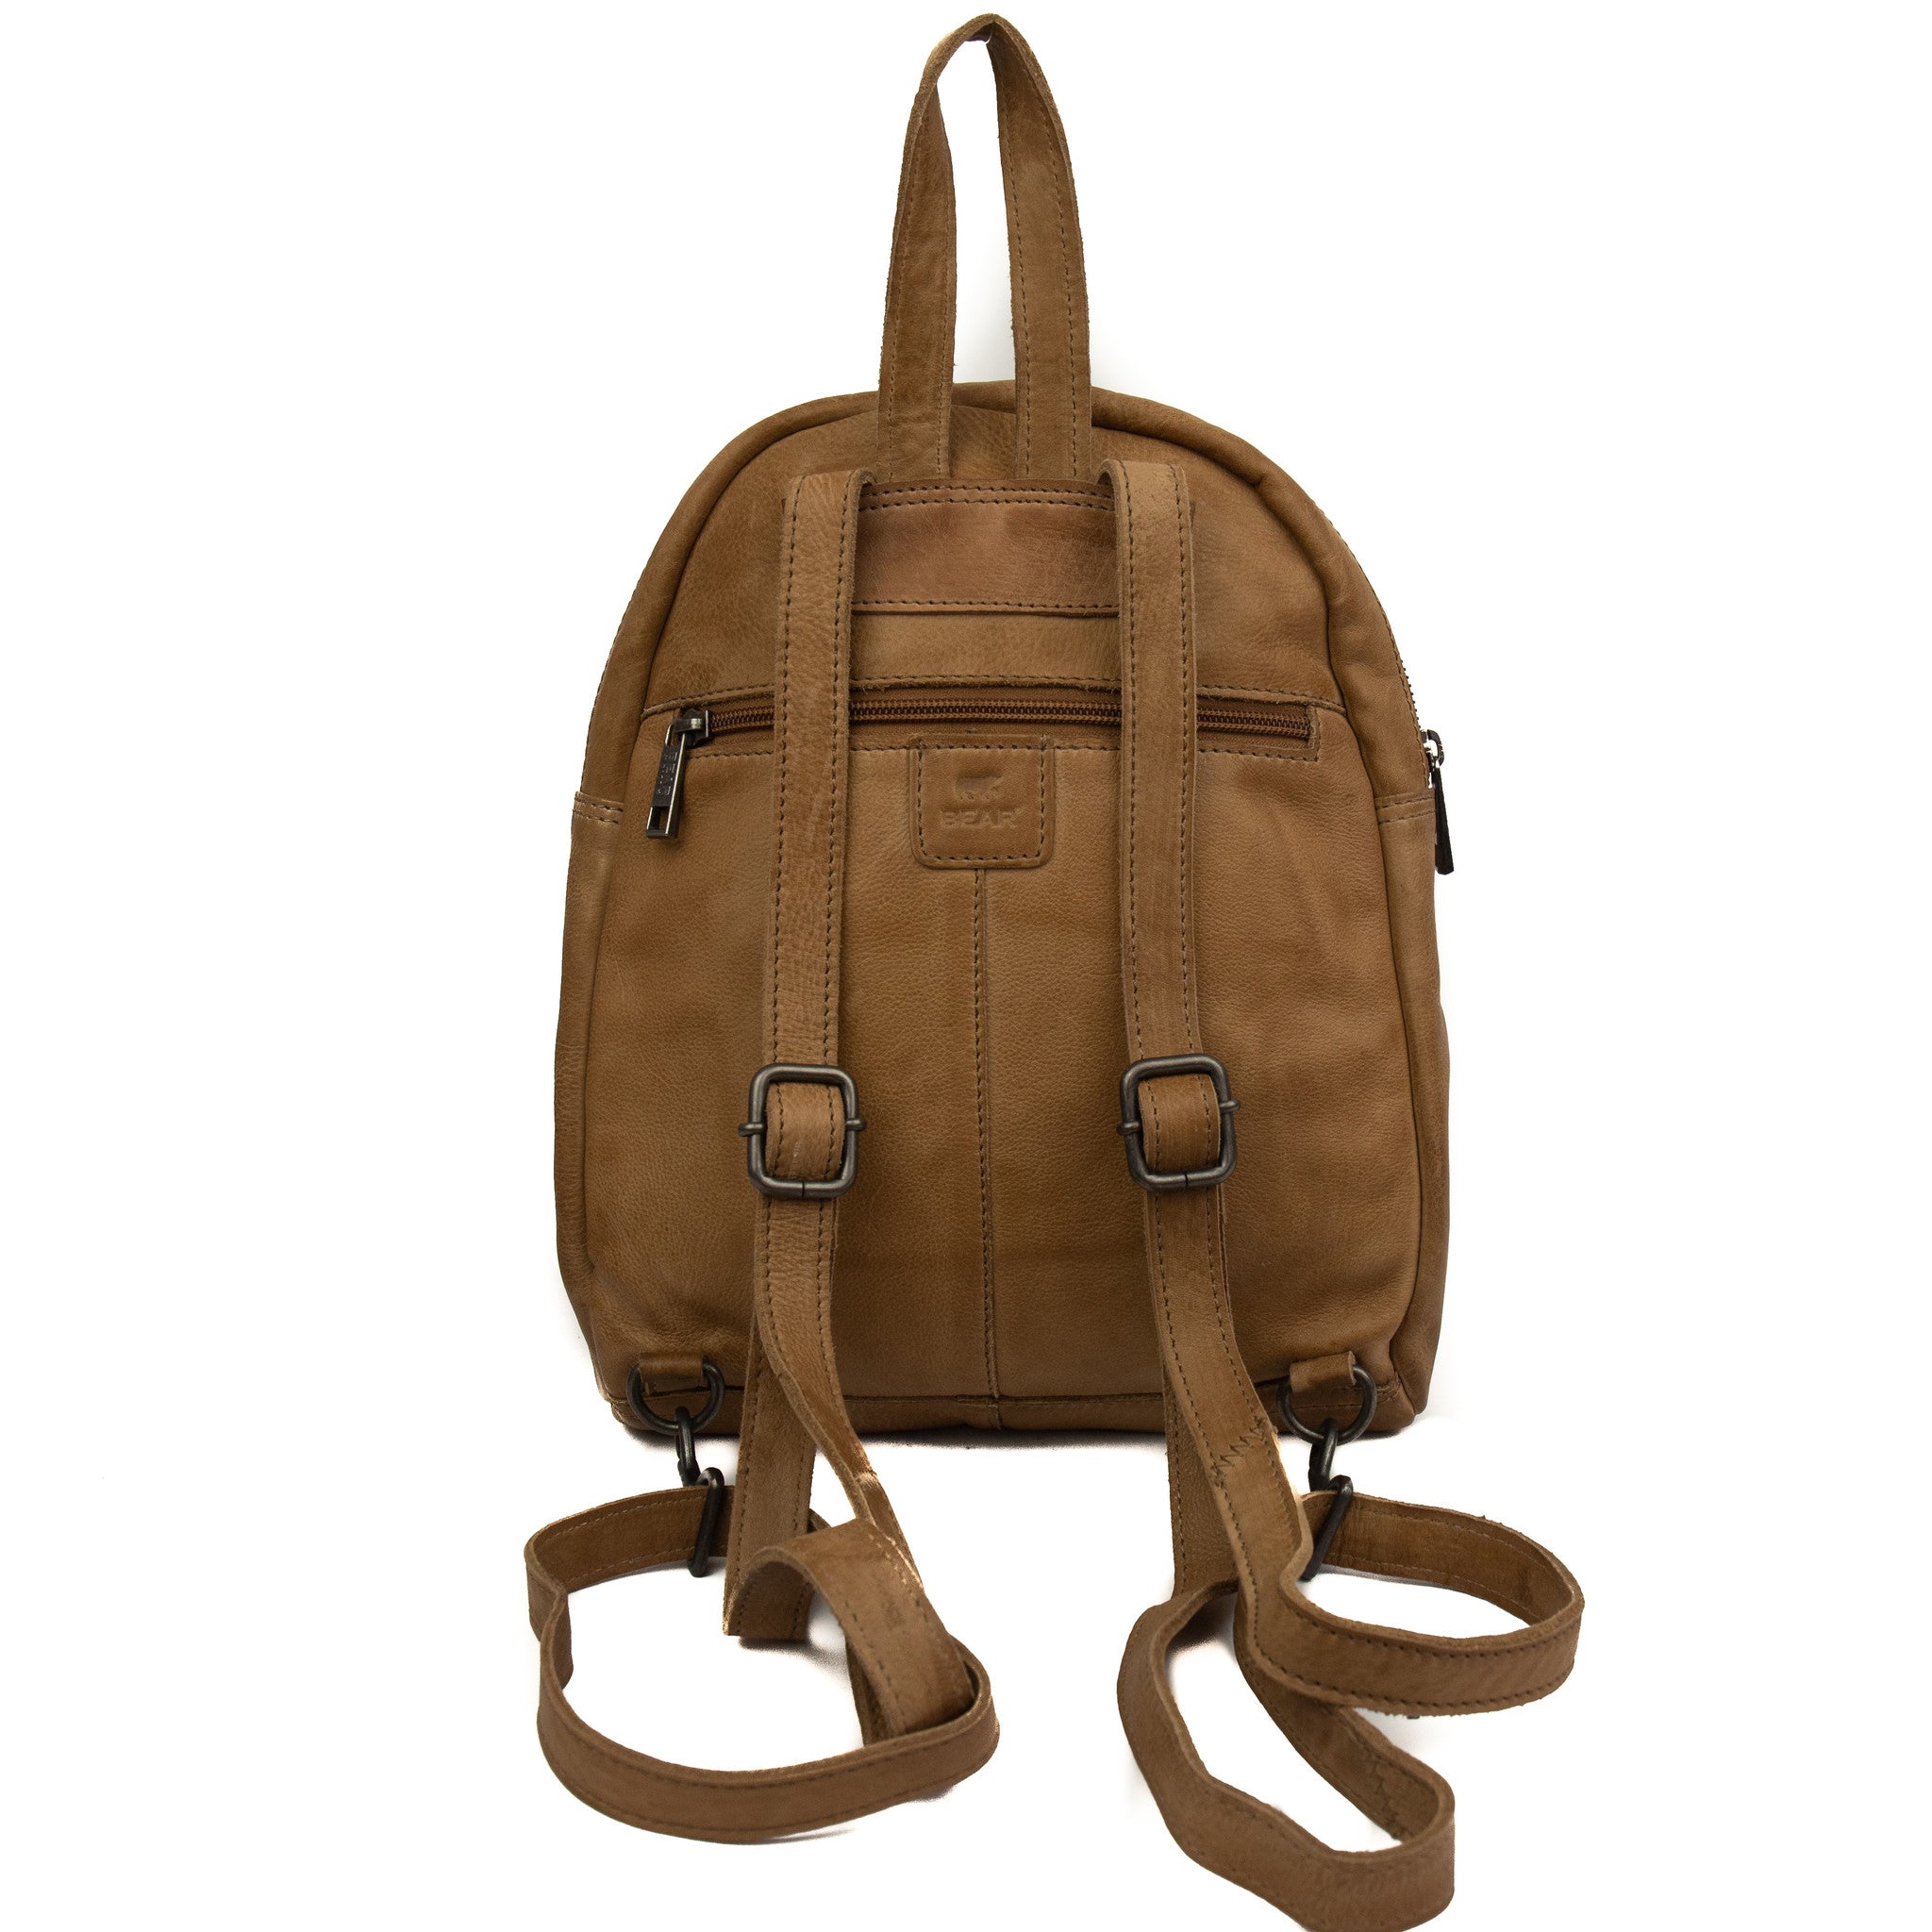 Backpack 'Lyra' taupe - CP 2186